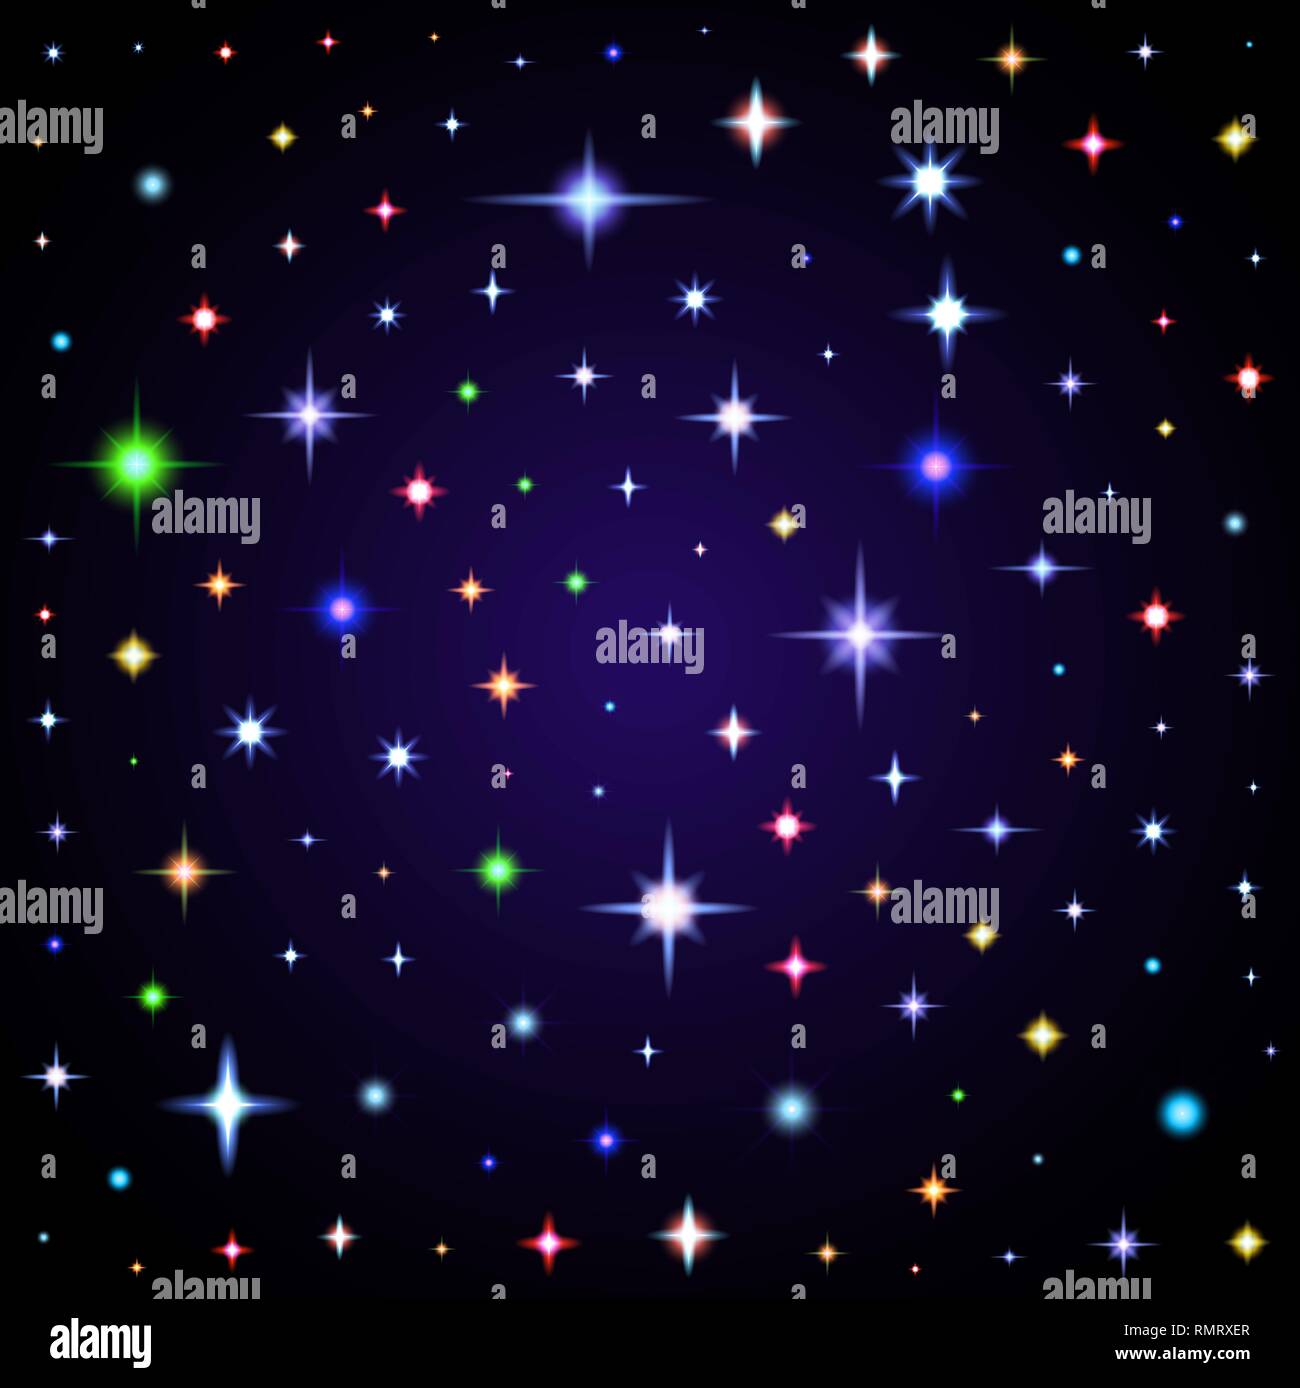 Light glare, space stars. Illustration of lens flares different colors. Stock Vector